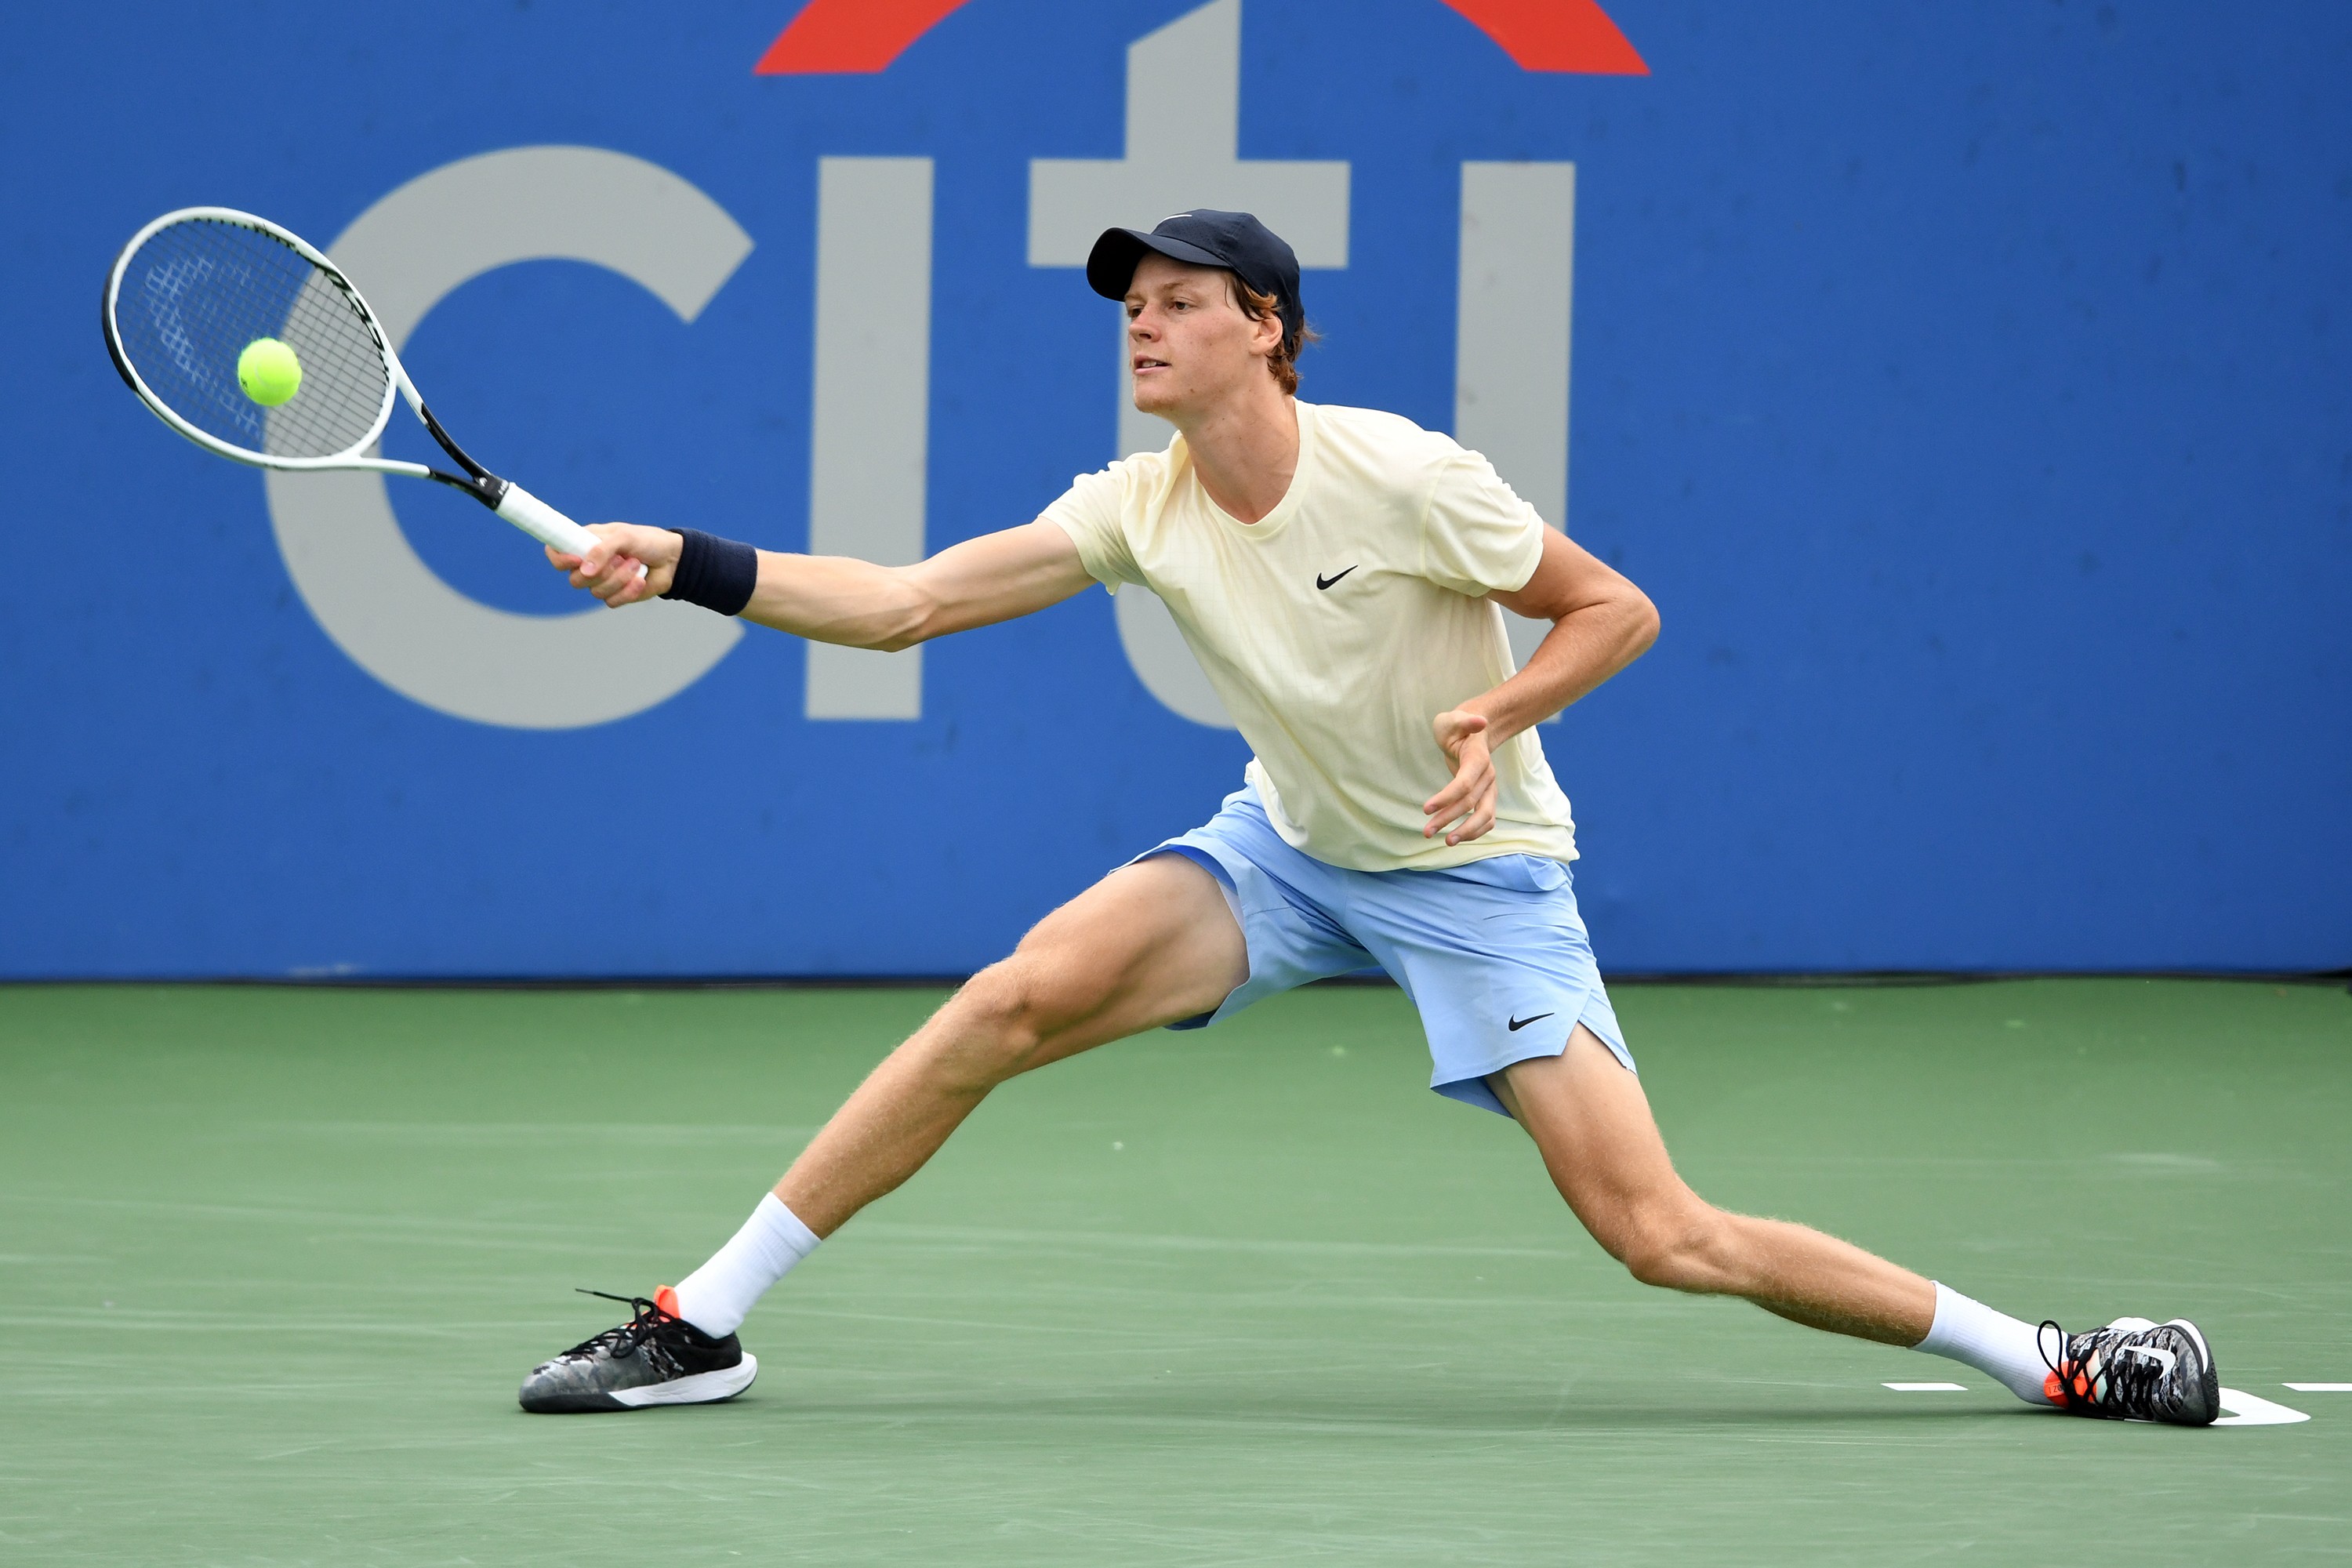 Jannik Sinner "manages the situation" to cool off Brooksby in Citi Open